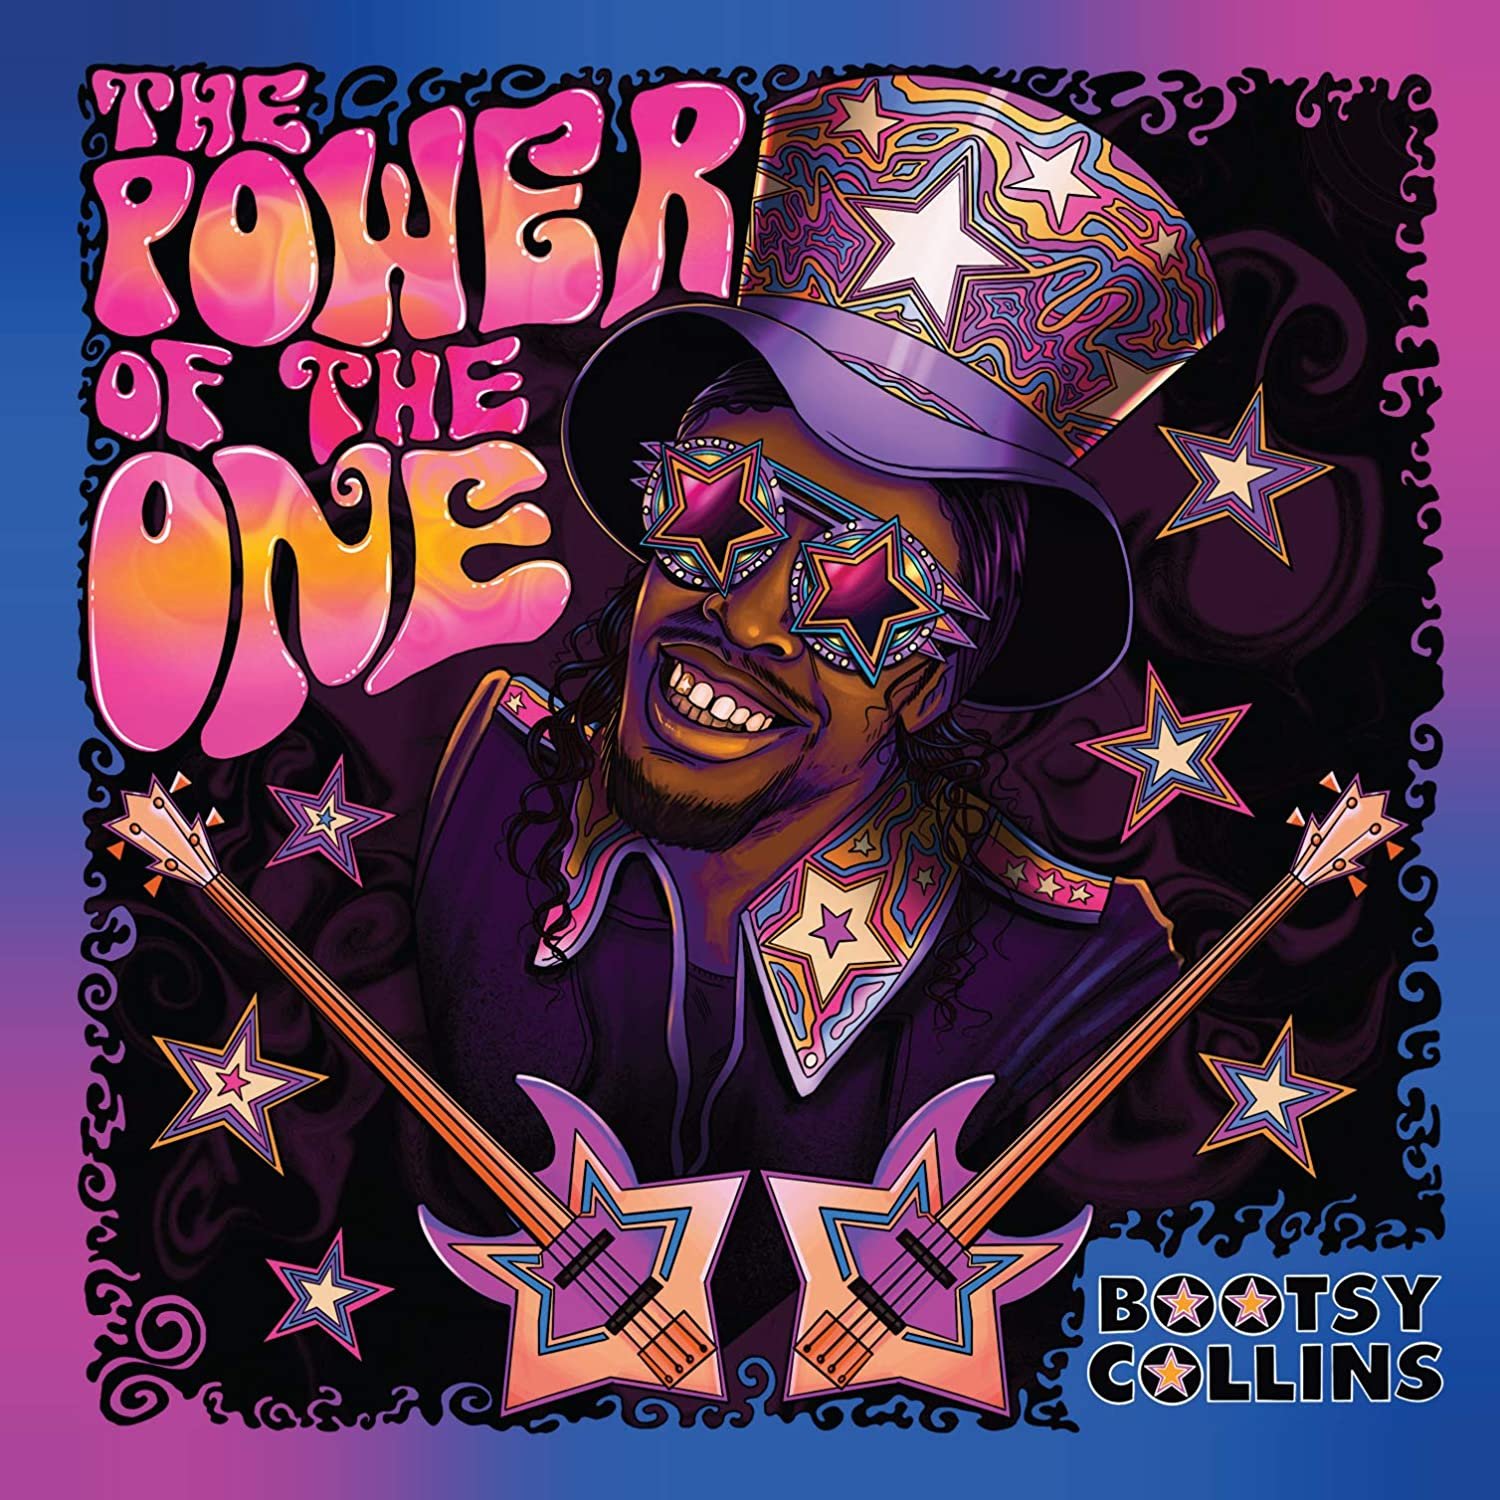 The Power of The One (Bootsy Collins, 2020)